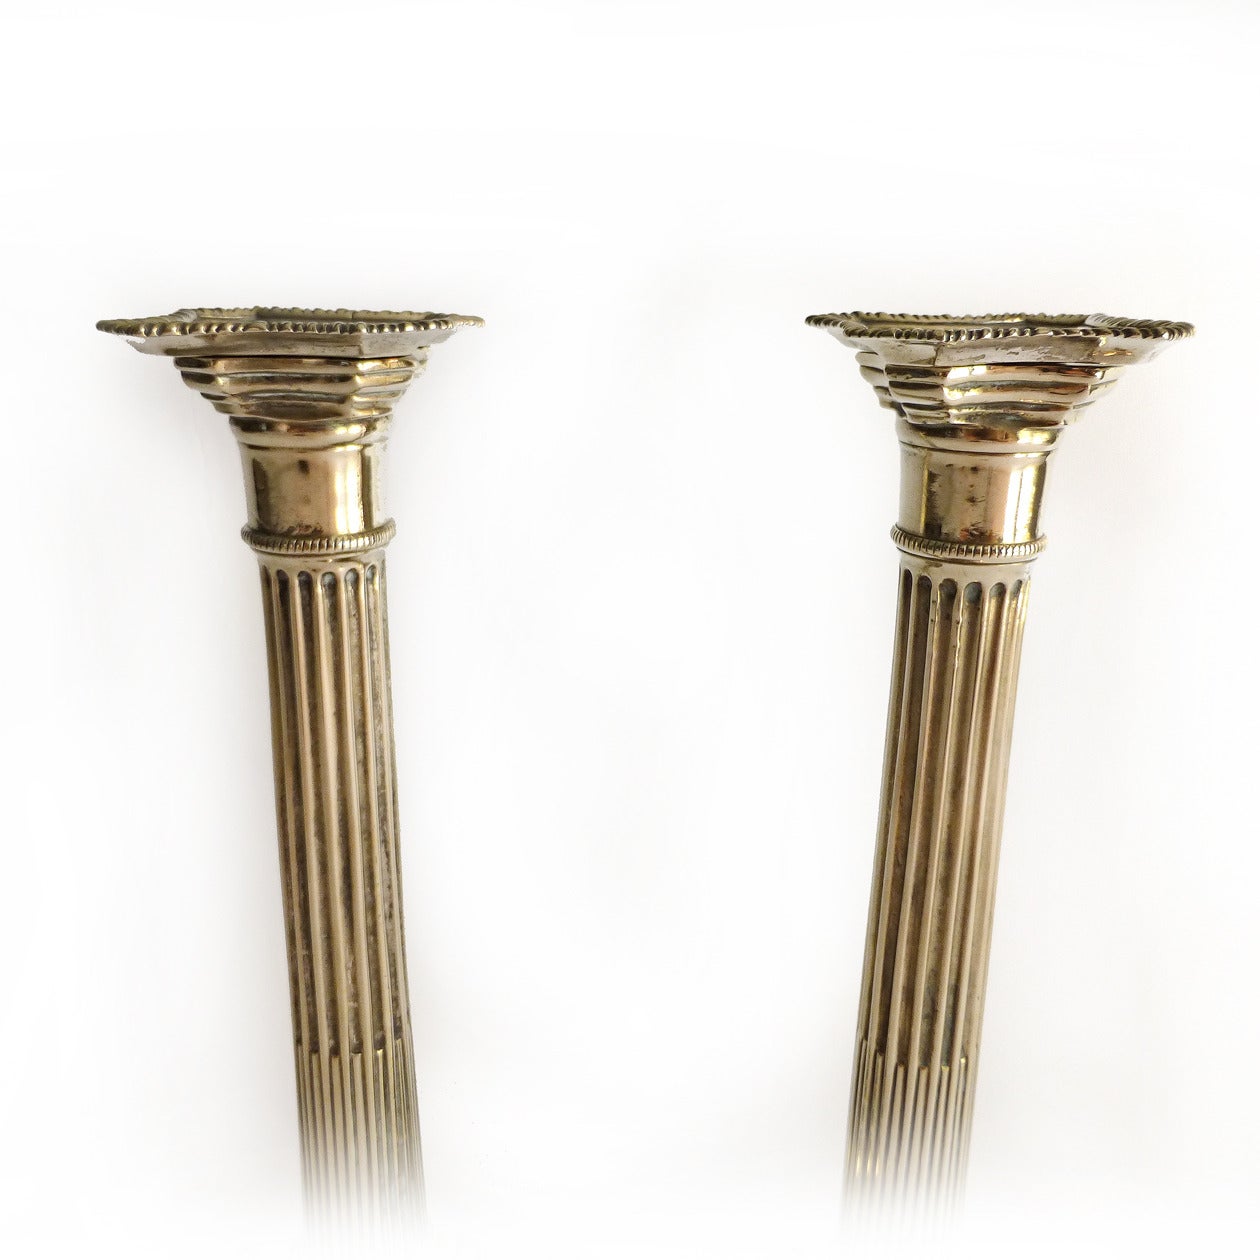 Very rare pair of English ionic column paktong candlesticks with original Bobeches. Remarkable pristine condition. Seamed shafts. Not tooled under base. Beaded and gadrooned, circa 1765.